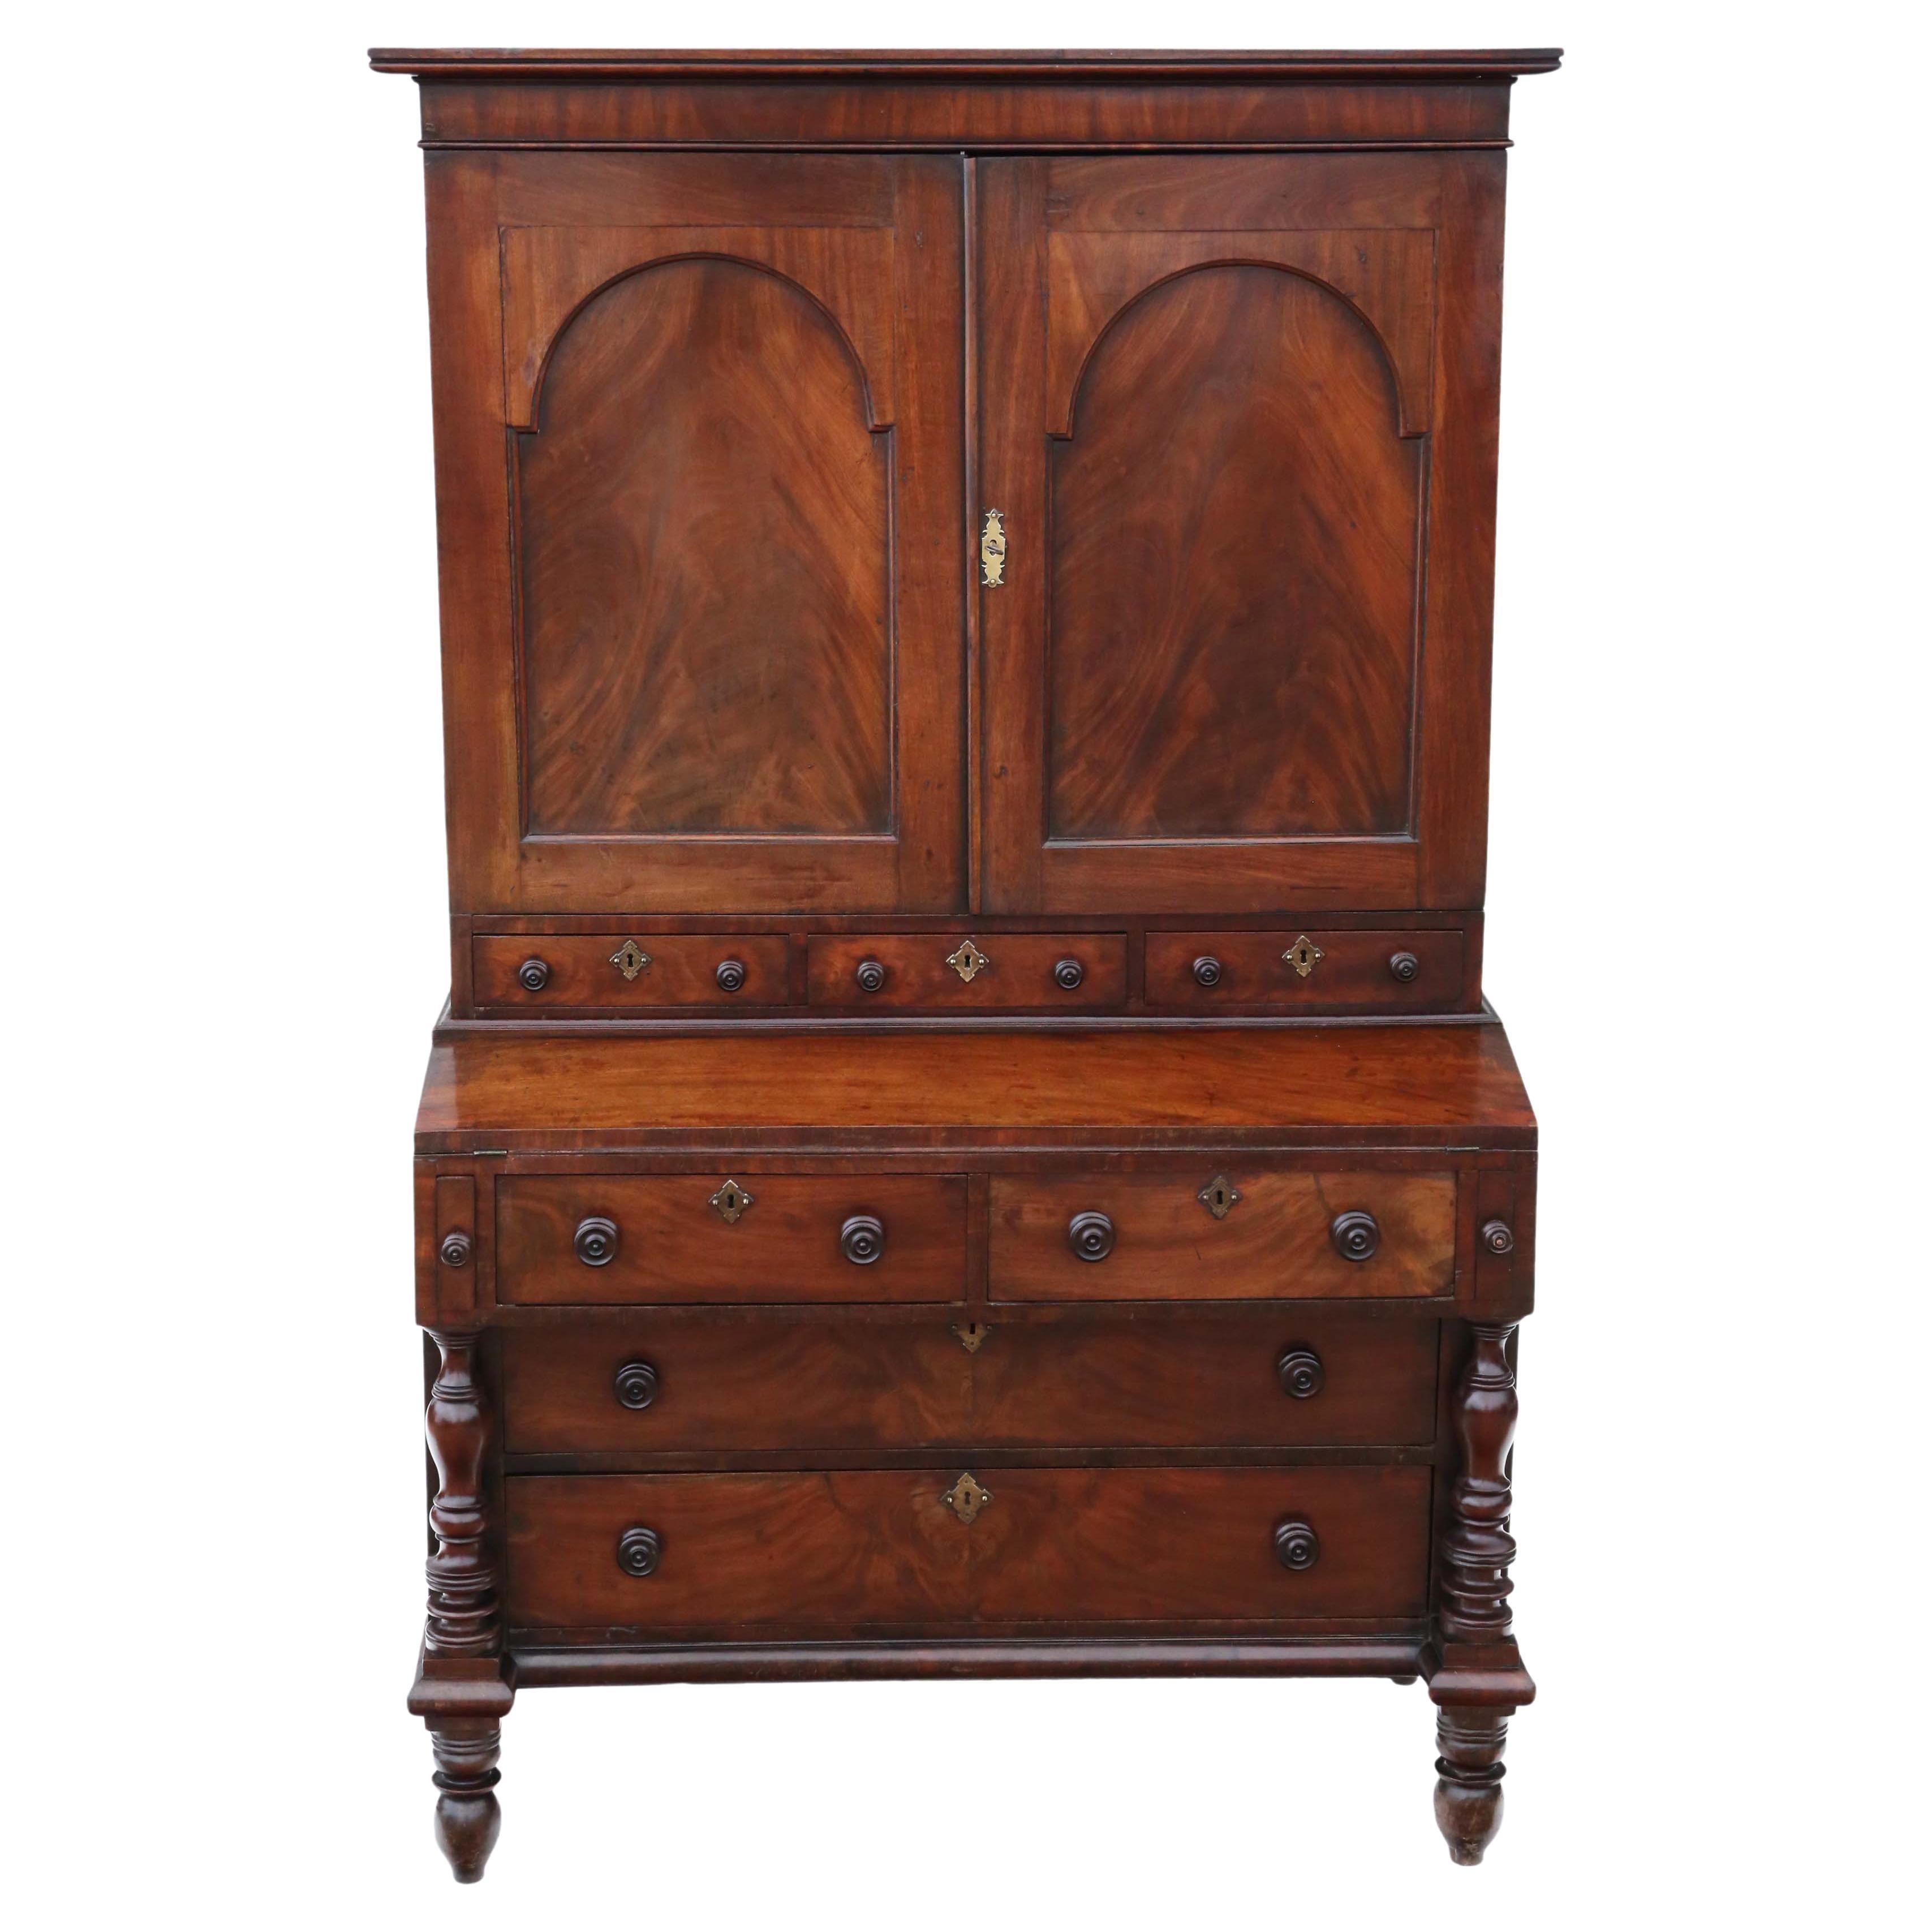 Antique High-Quality Mahogany Housekeeper's Cupboard with Secretaire, circa 1800 For Sale